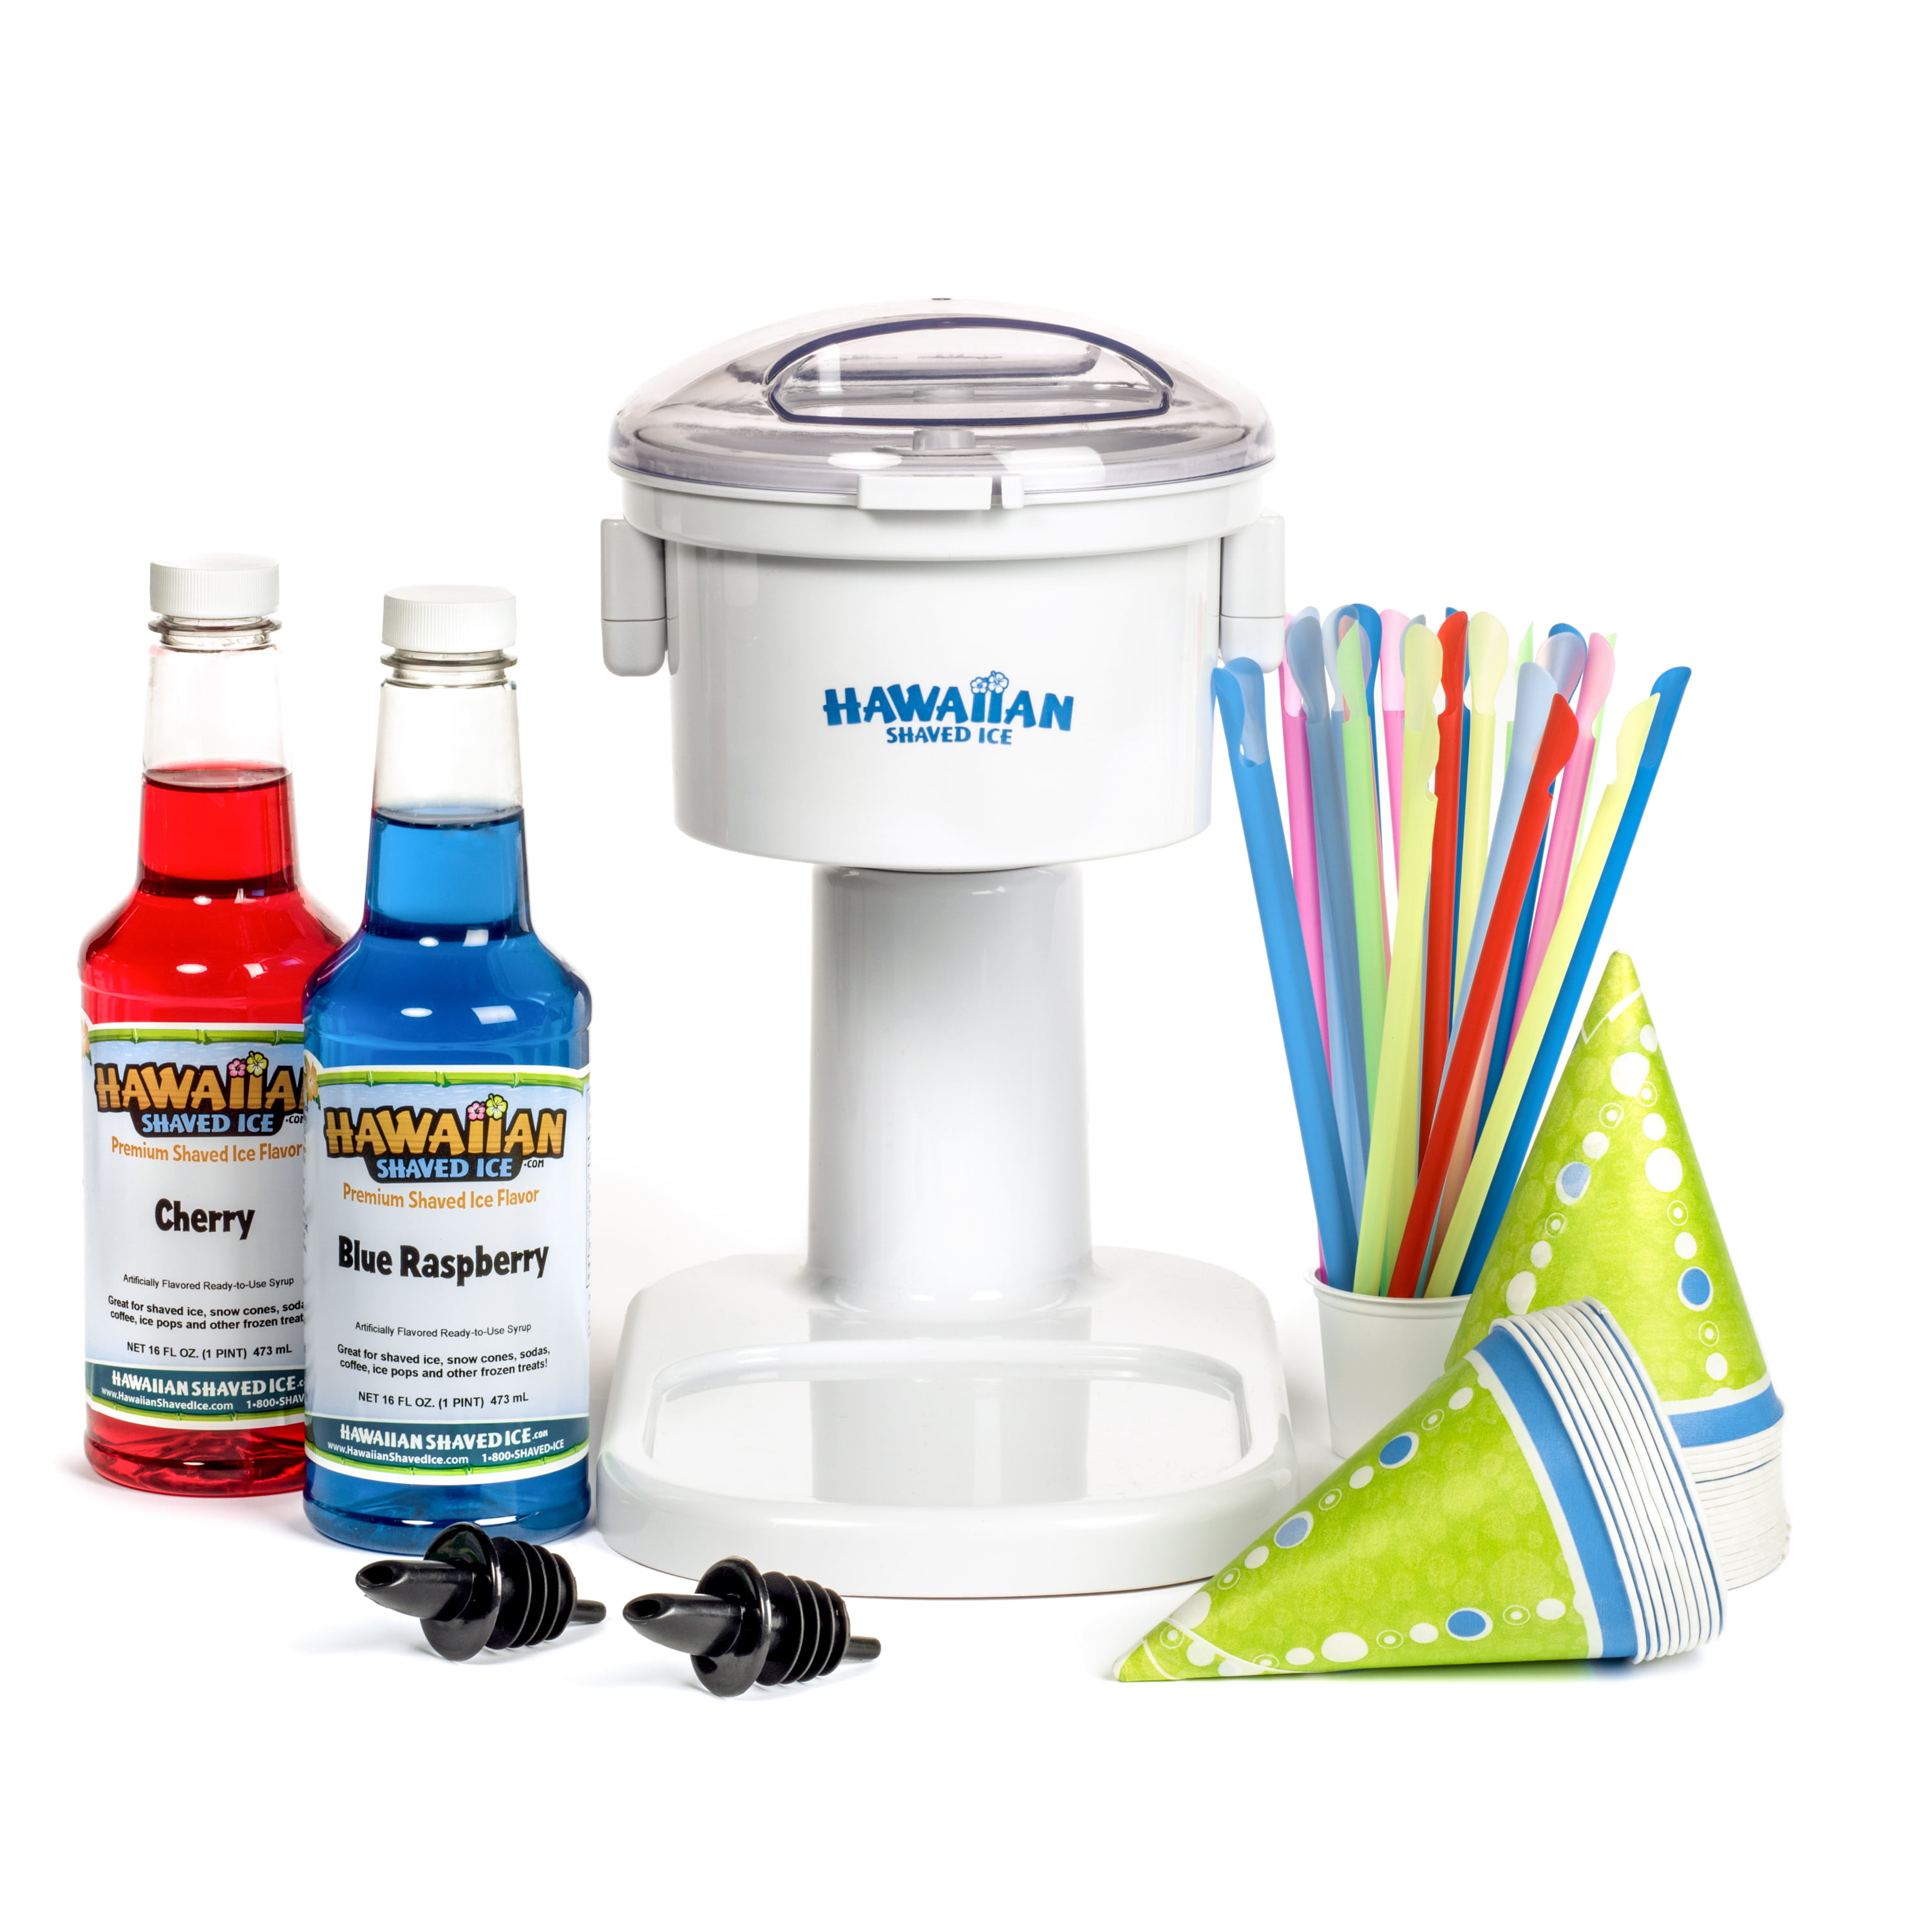 Hawaiian Shaved Ice Machine and Syrup 6 Flavor Party PackageIncludes S900A 6 